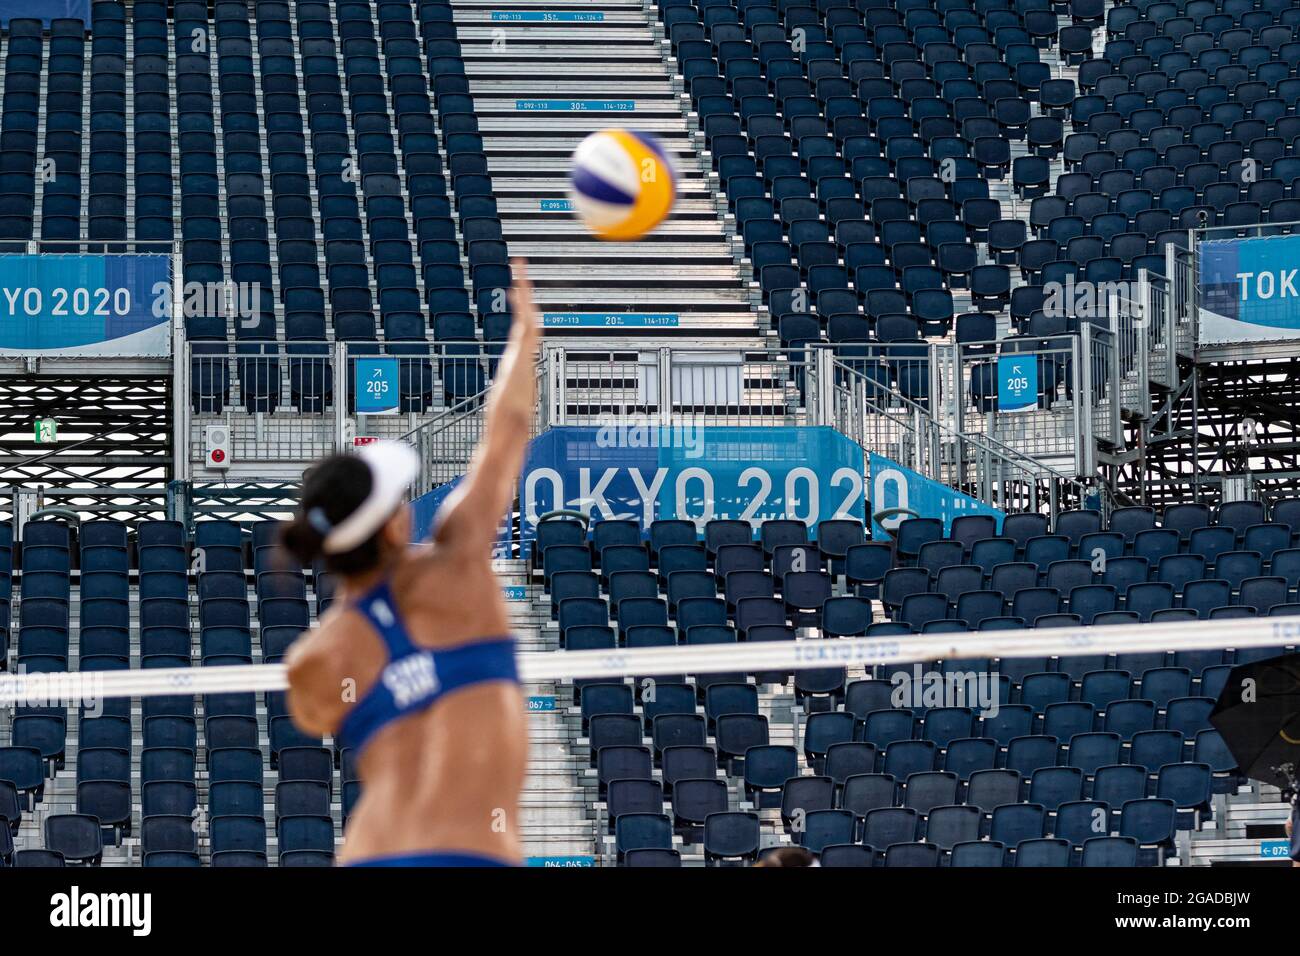 Tokyo, Japan. 30th July, 2021. Olympic Games: Beach Voley Liliana/Elisa from Spain against Xue/Wang X.X. from China. Credit: ABEL F. ROS/Alamy Live News Stock Photo